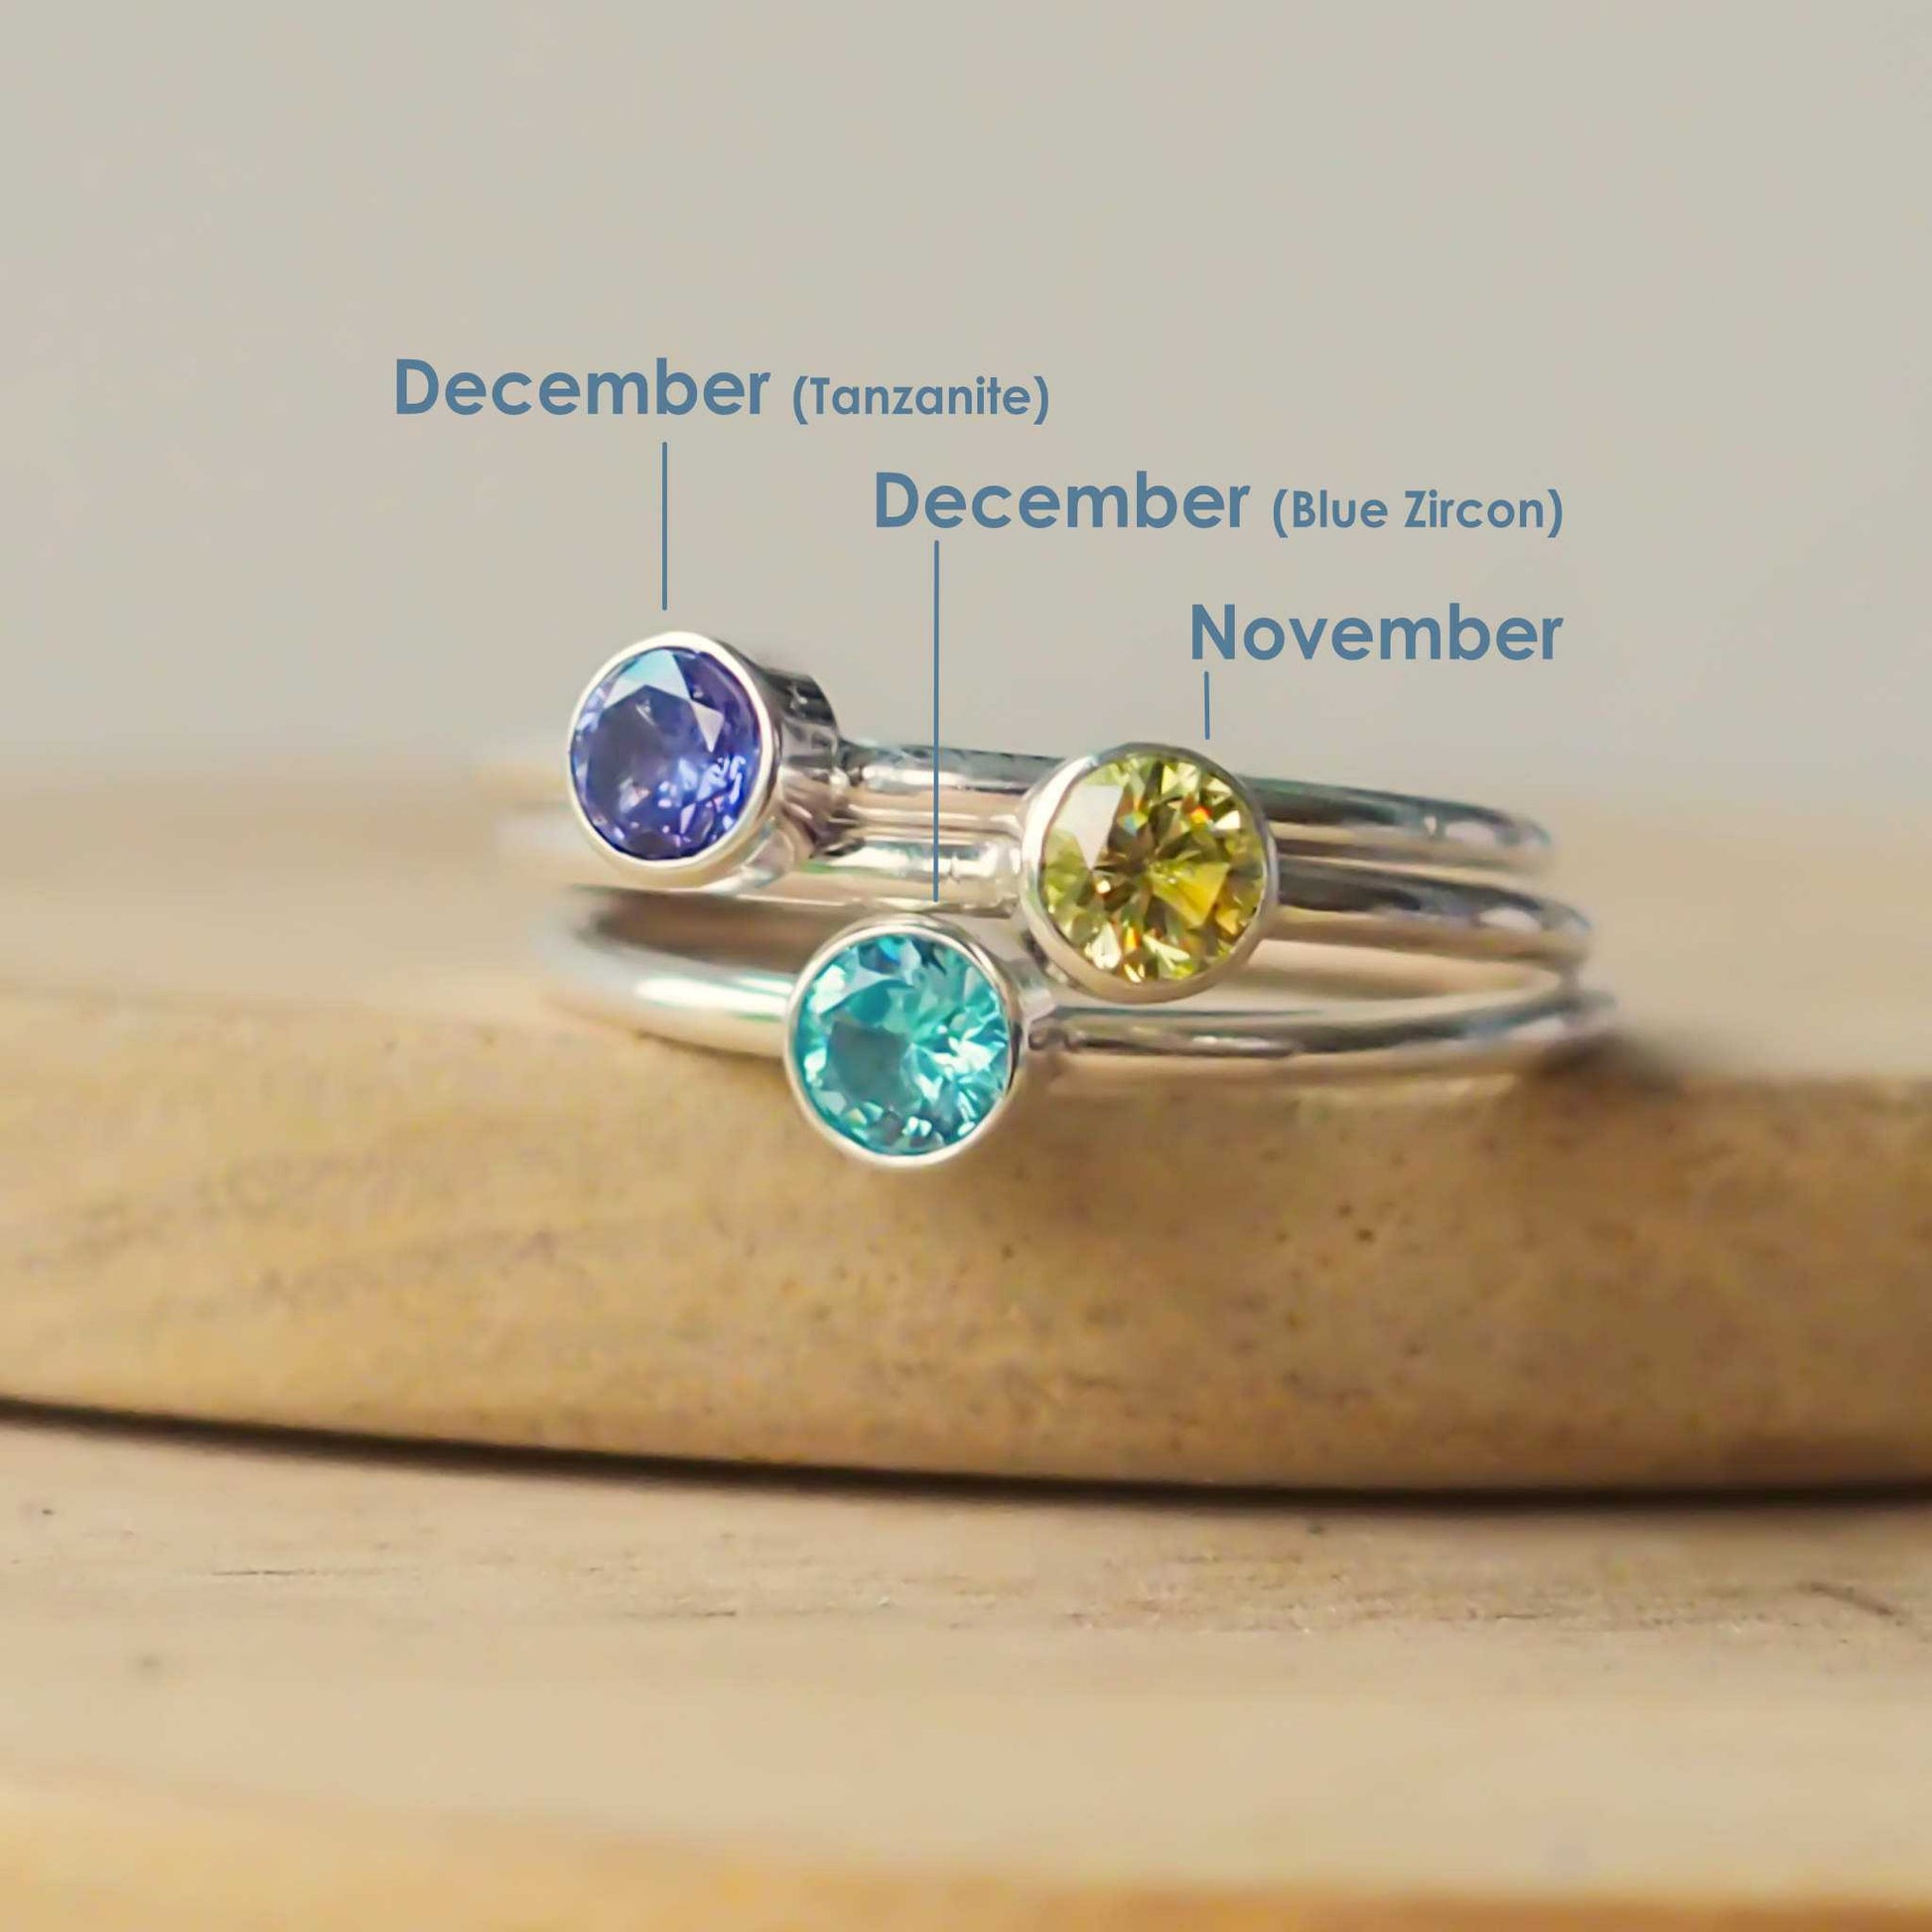 Three rings showing December gem variations - Tanzanite and Blue Zircon, as well as a CItrine for November. These are sterling silver stacking rings made in scotland by maram jewellery